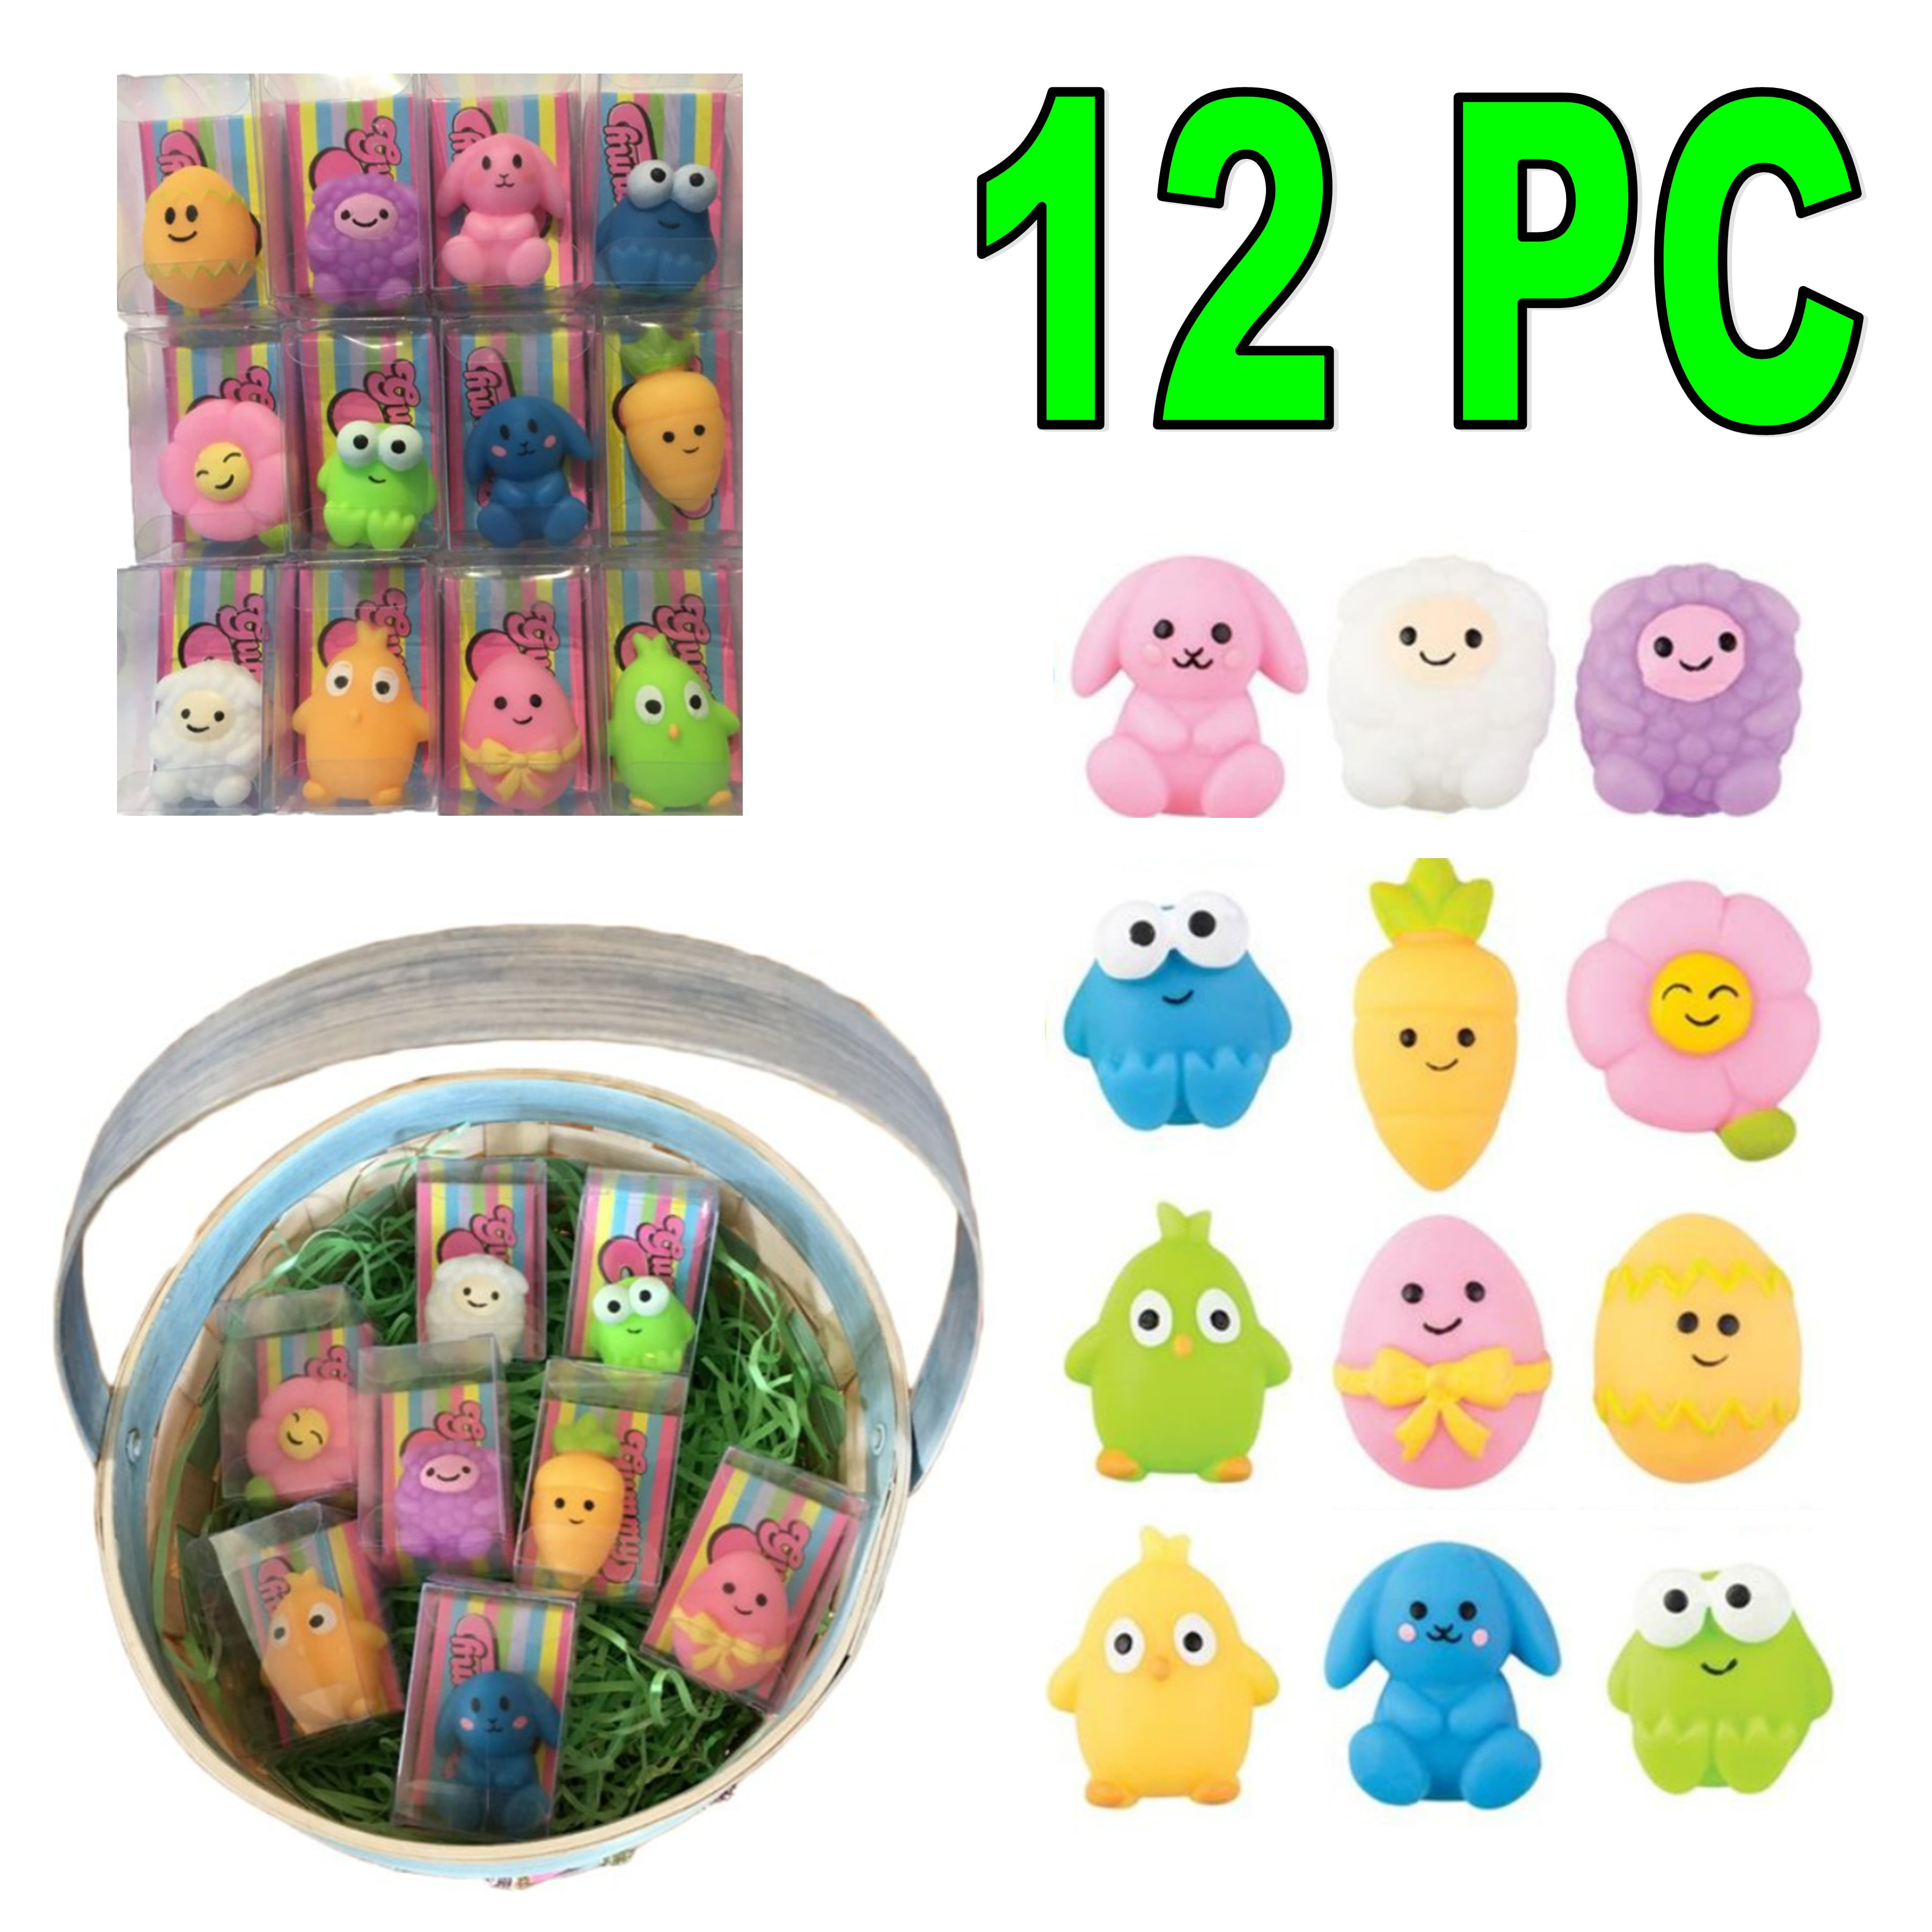 Satkago 24 Pcs Birthday Party Favors for Kids Light Up Bracelets Easter Gifts Basket Stuffers Glow in The Dark Party Supplies Toys 